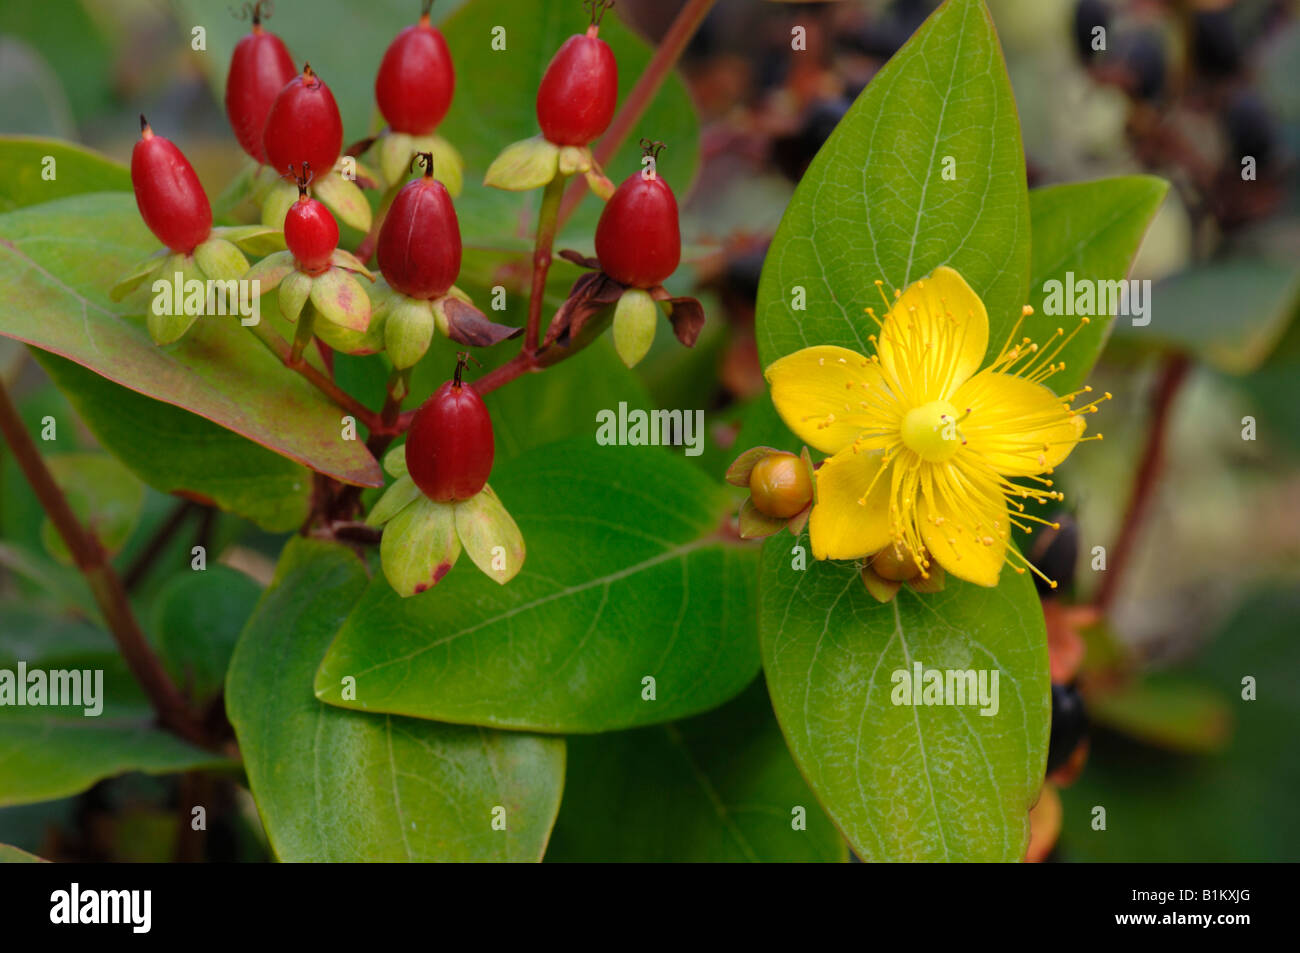 St Johns Wort (Hypericum sp.),  twig with berries and flowers Stock Photo